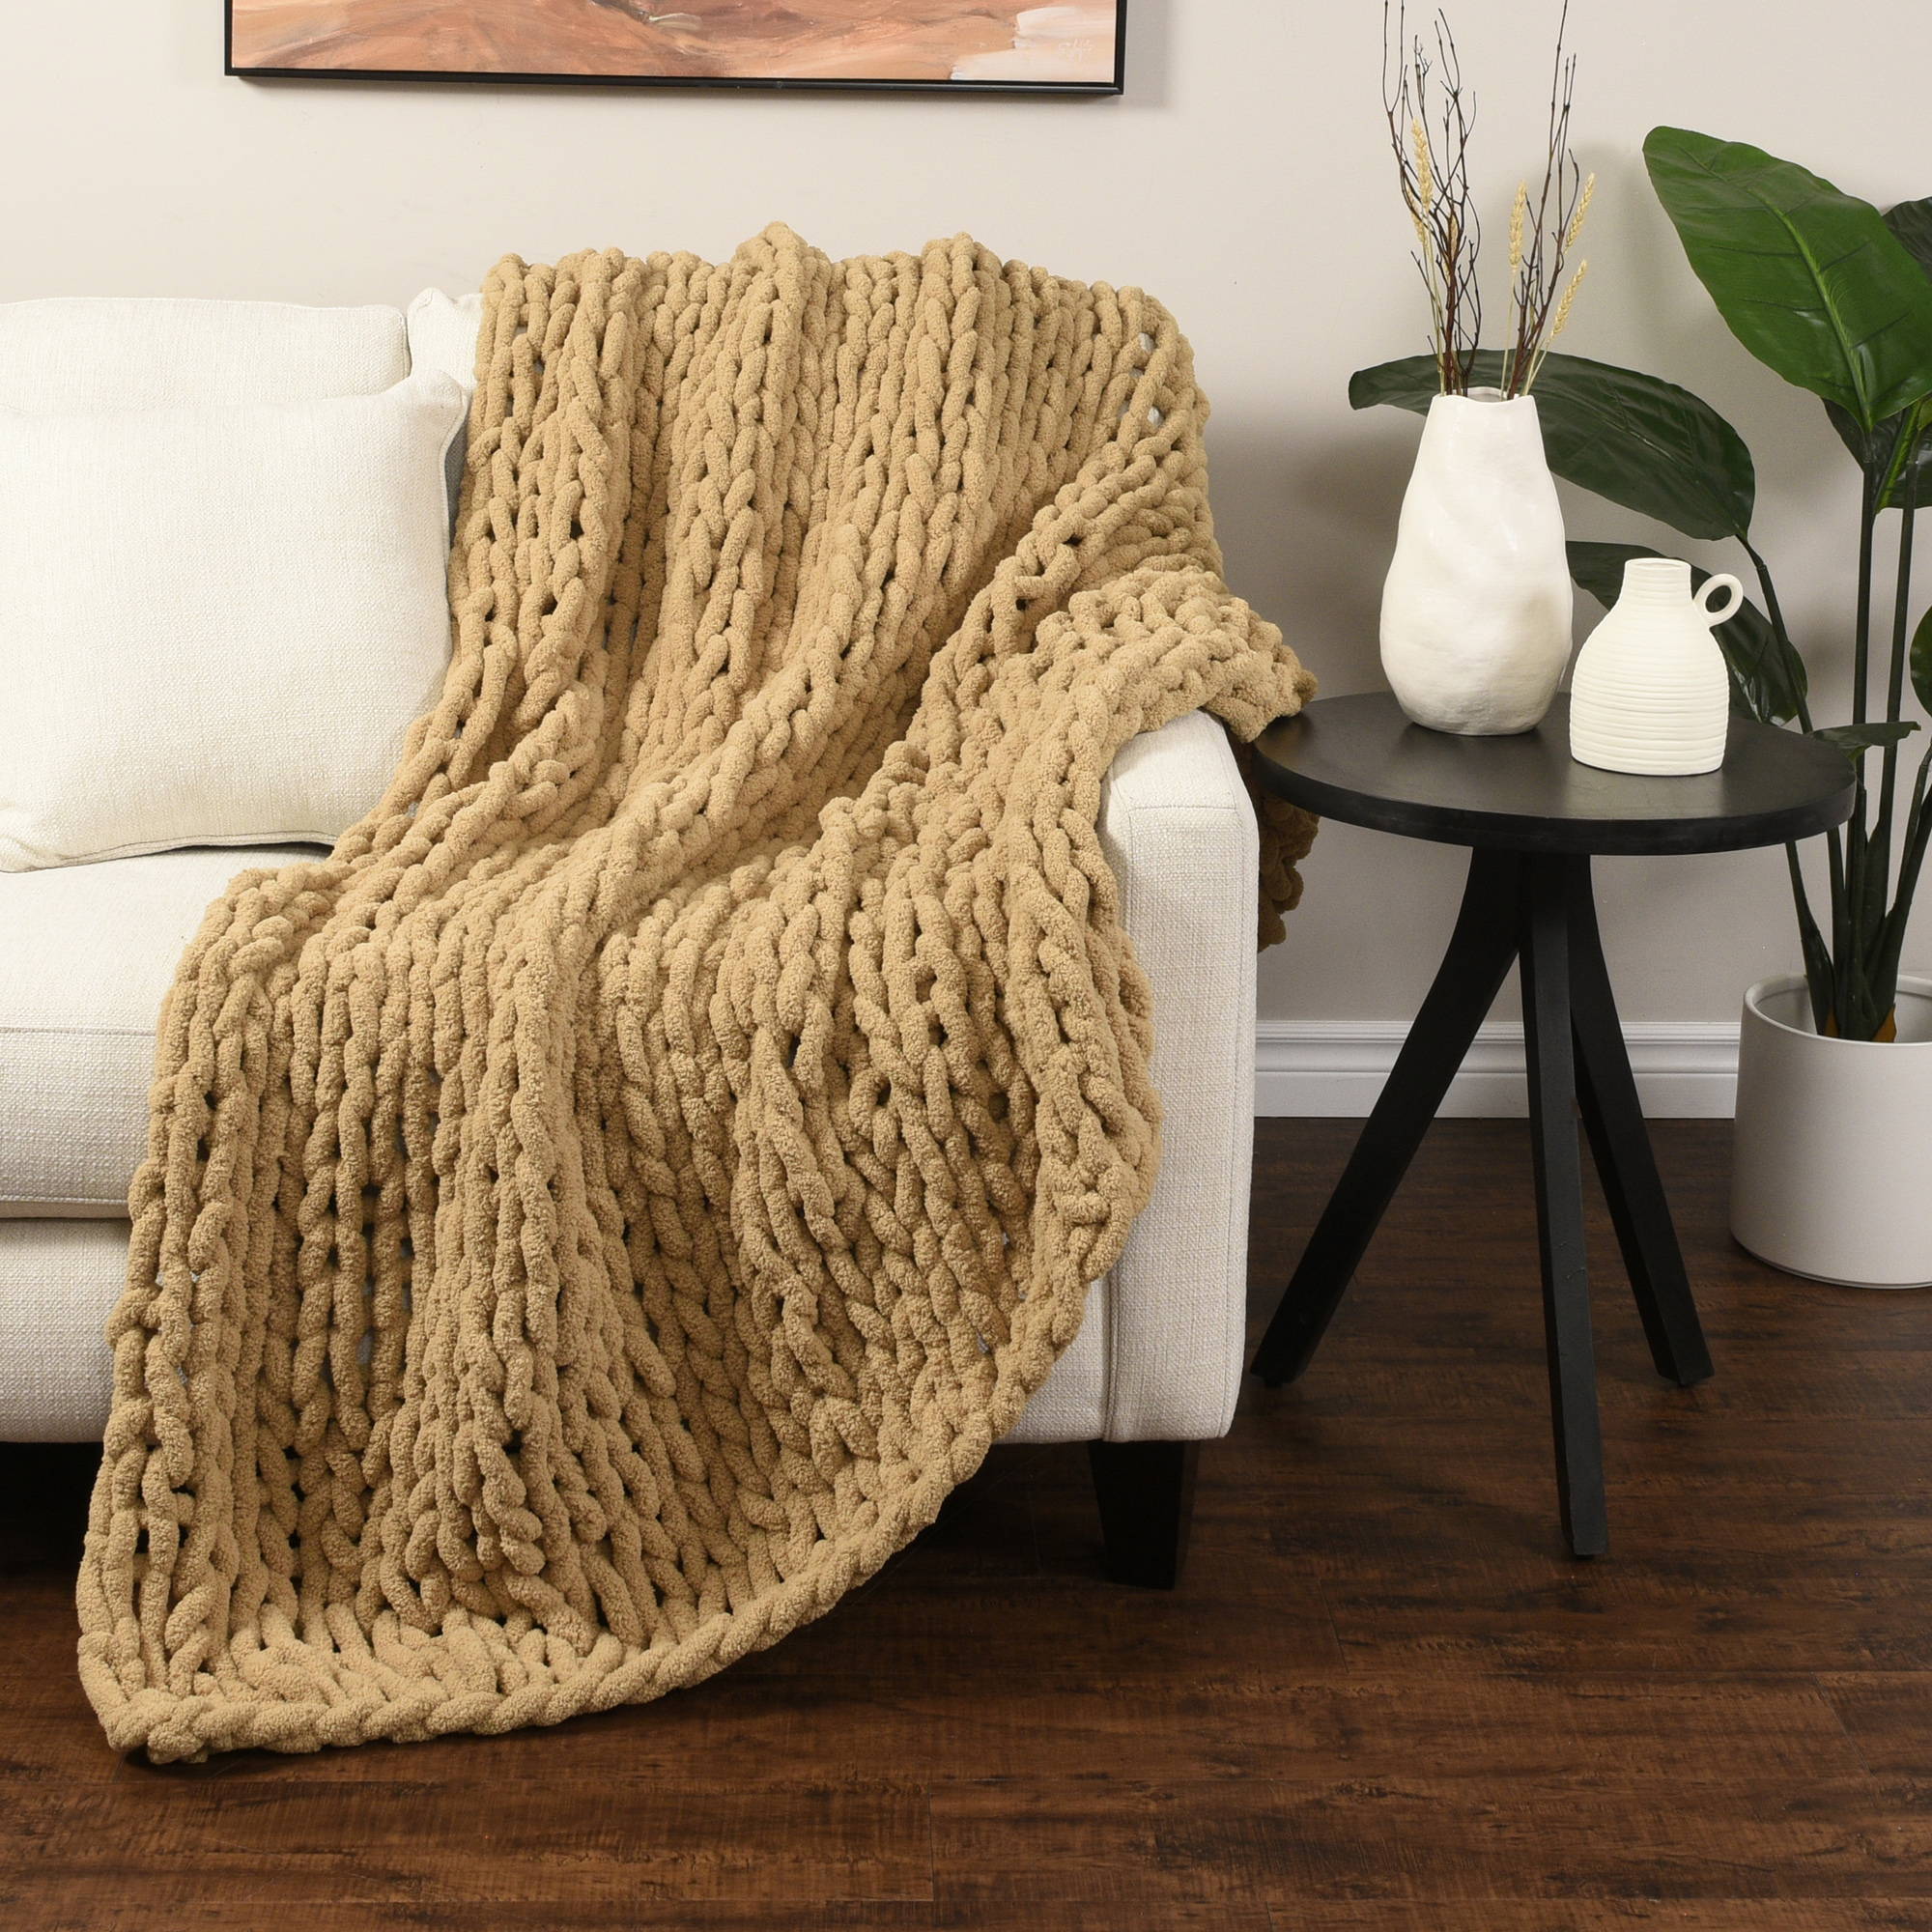 Chunky knit throw on couch